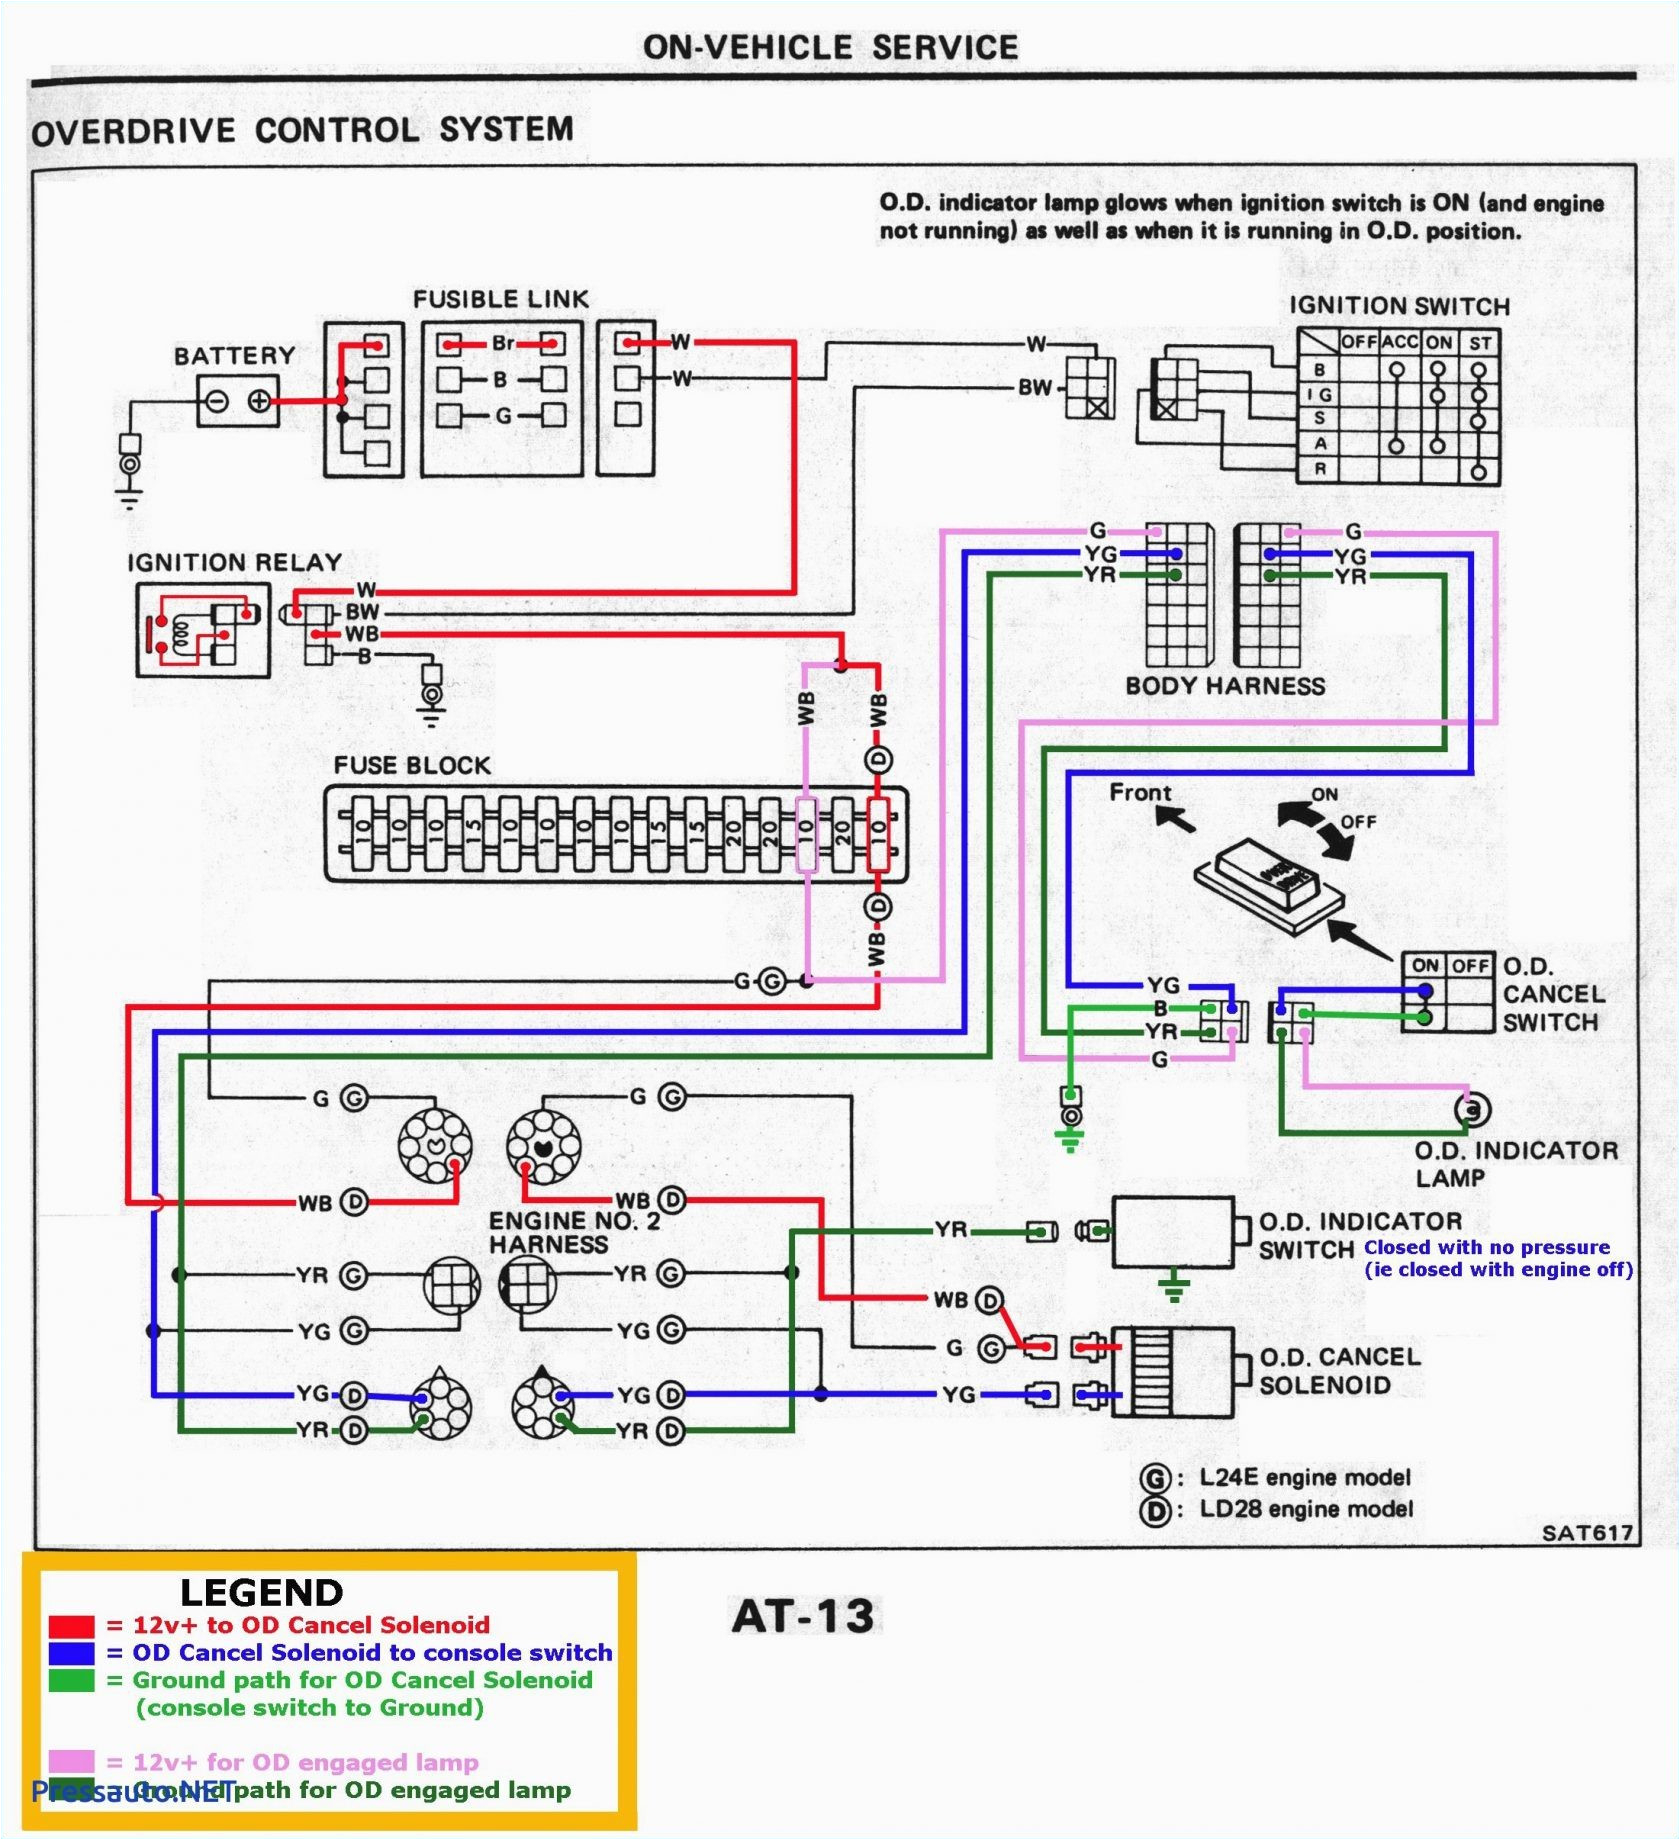 automotive ignition switches wiring harnesses and controllers automotive ignition wiring harness